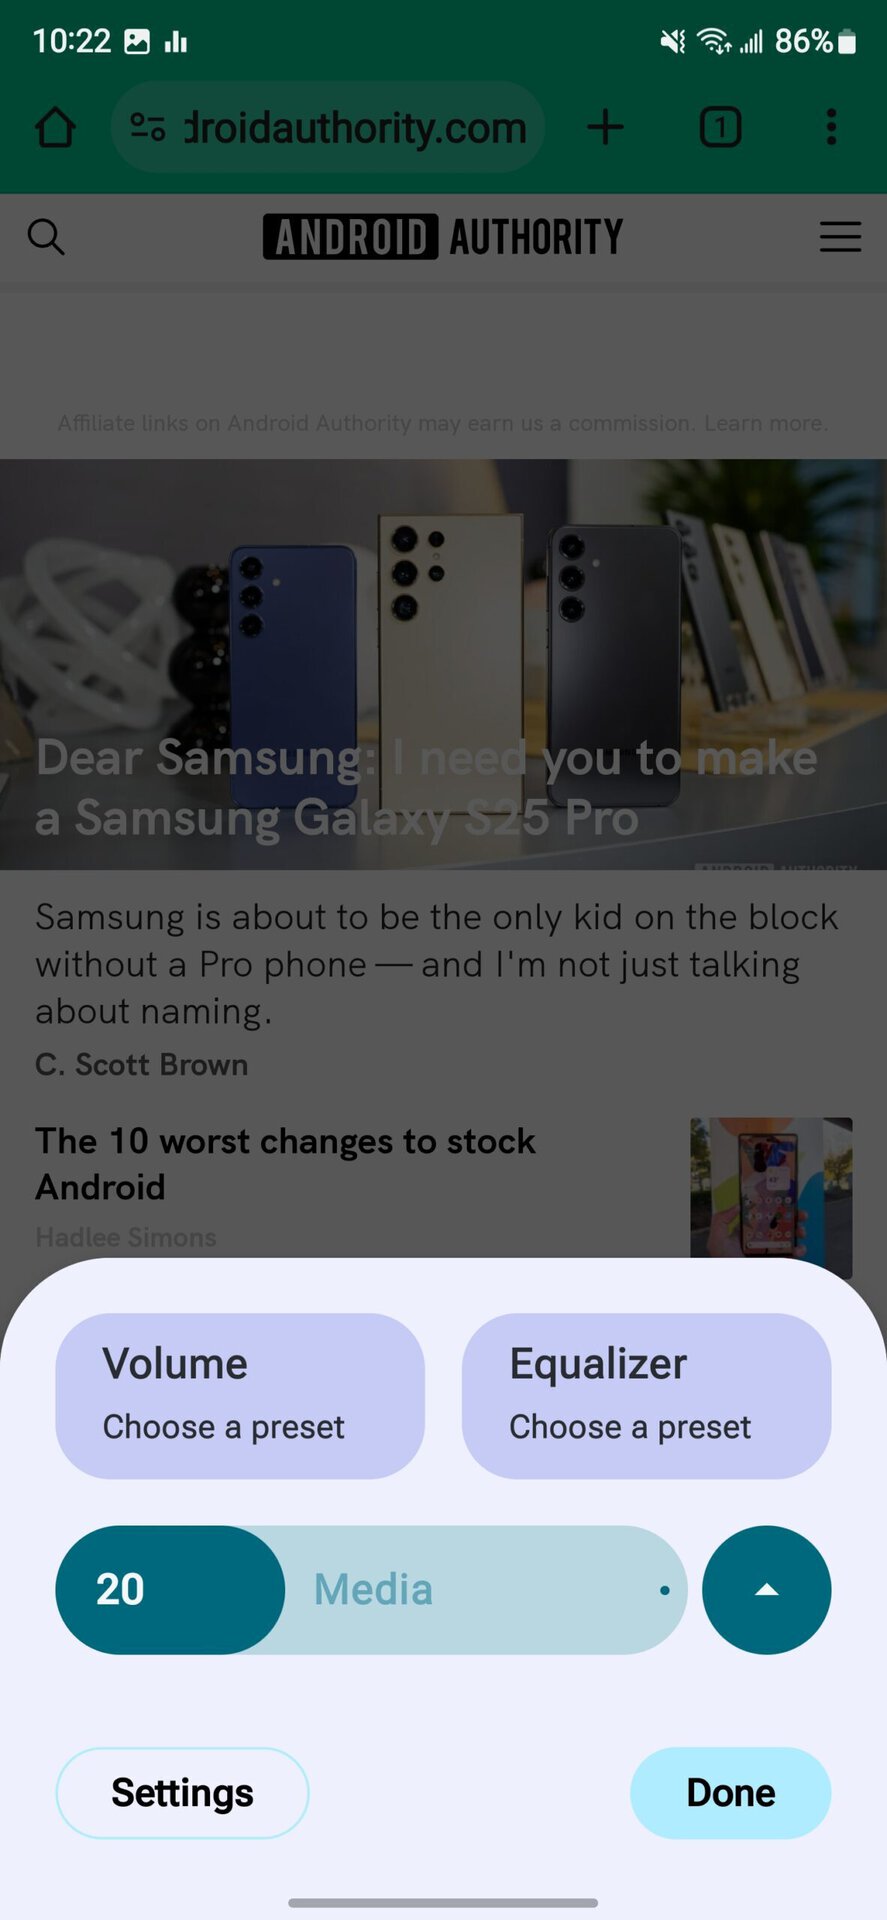 This app brings Android 15’s new volume panel to any device